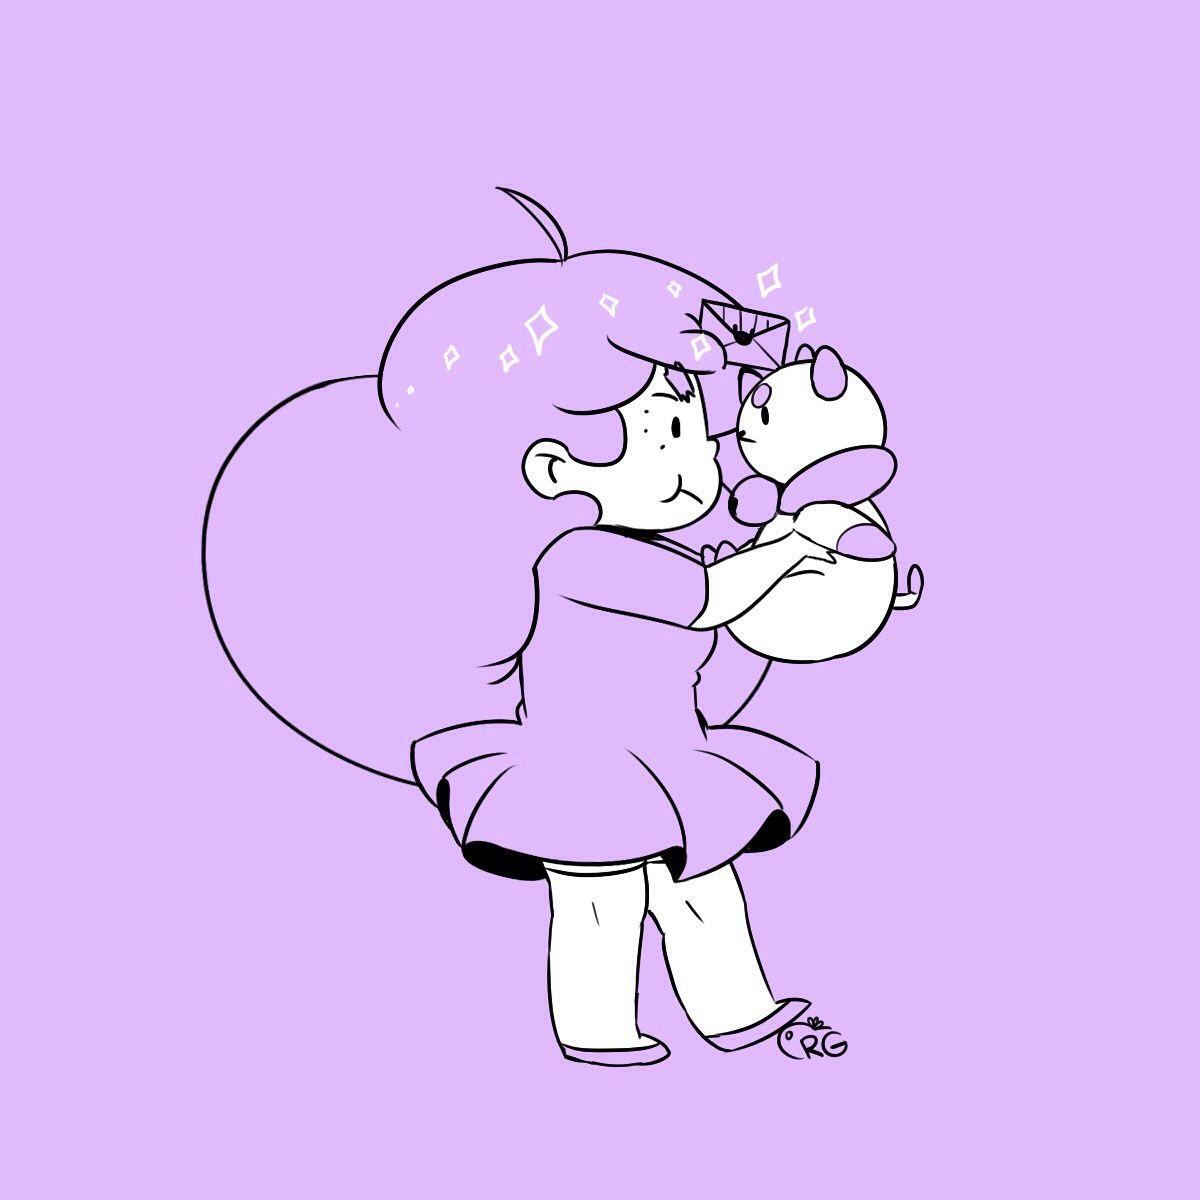 Bee and Puppycat image Bee and Puppycat HD wallpaper and background